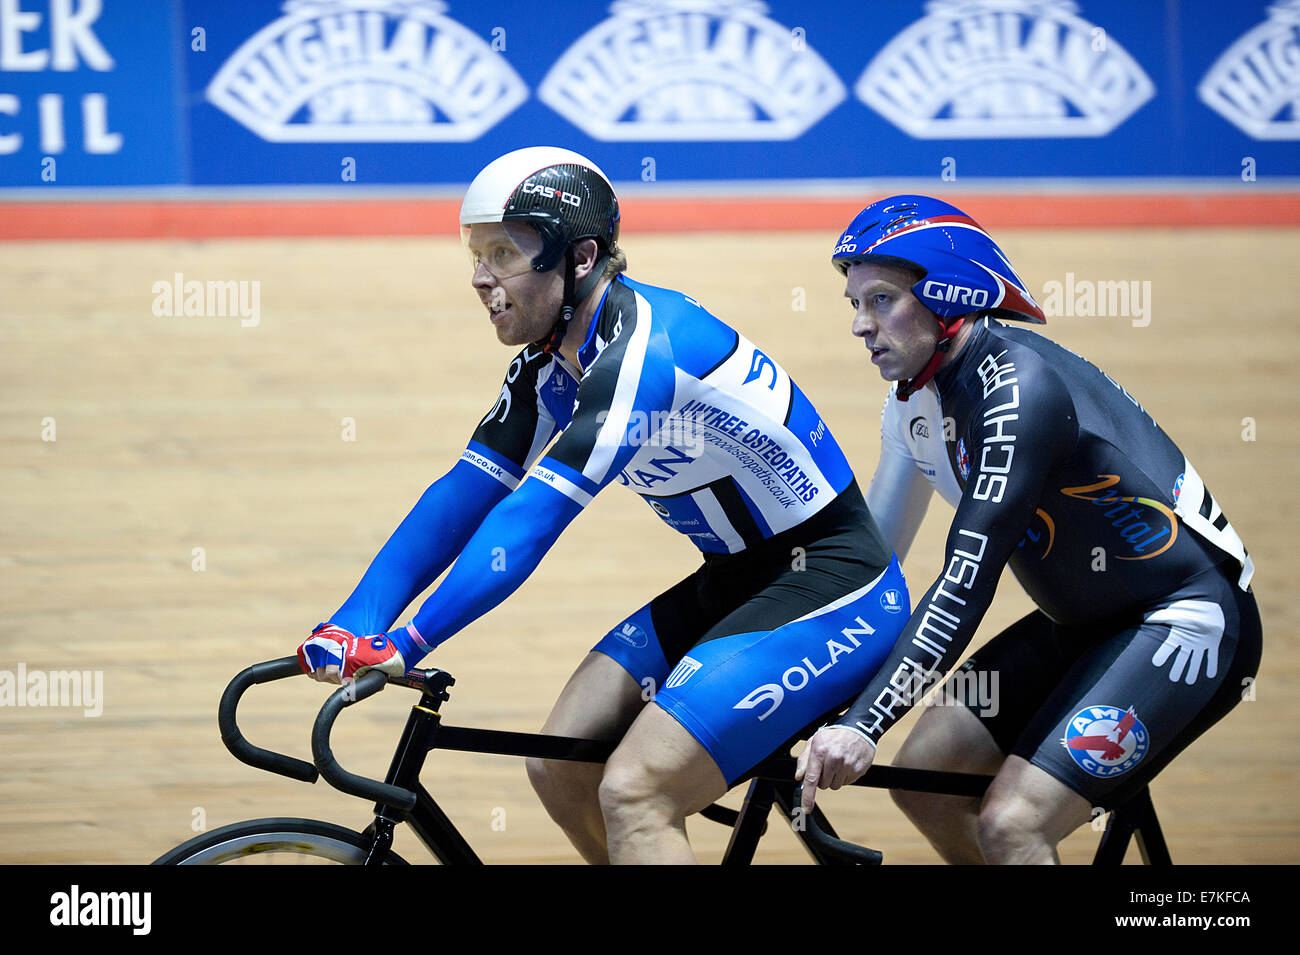 Craig MacLean  and Anthony Kappes tandem racing at Manchester velodrome. Stock Photo